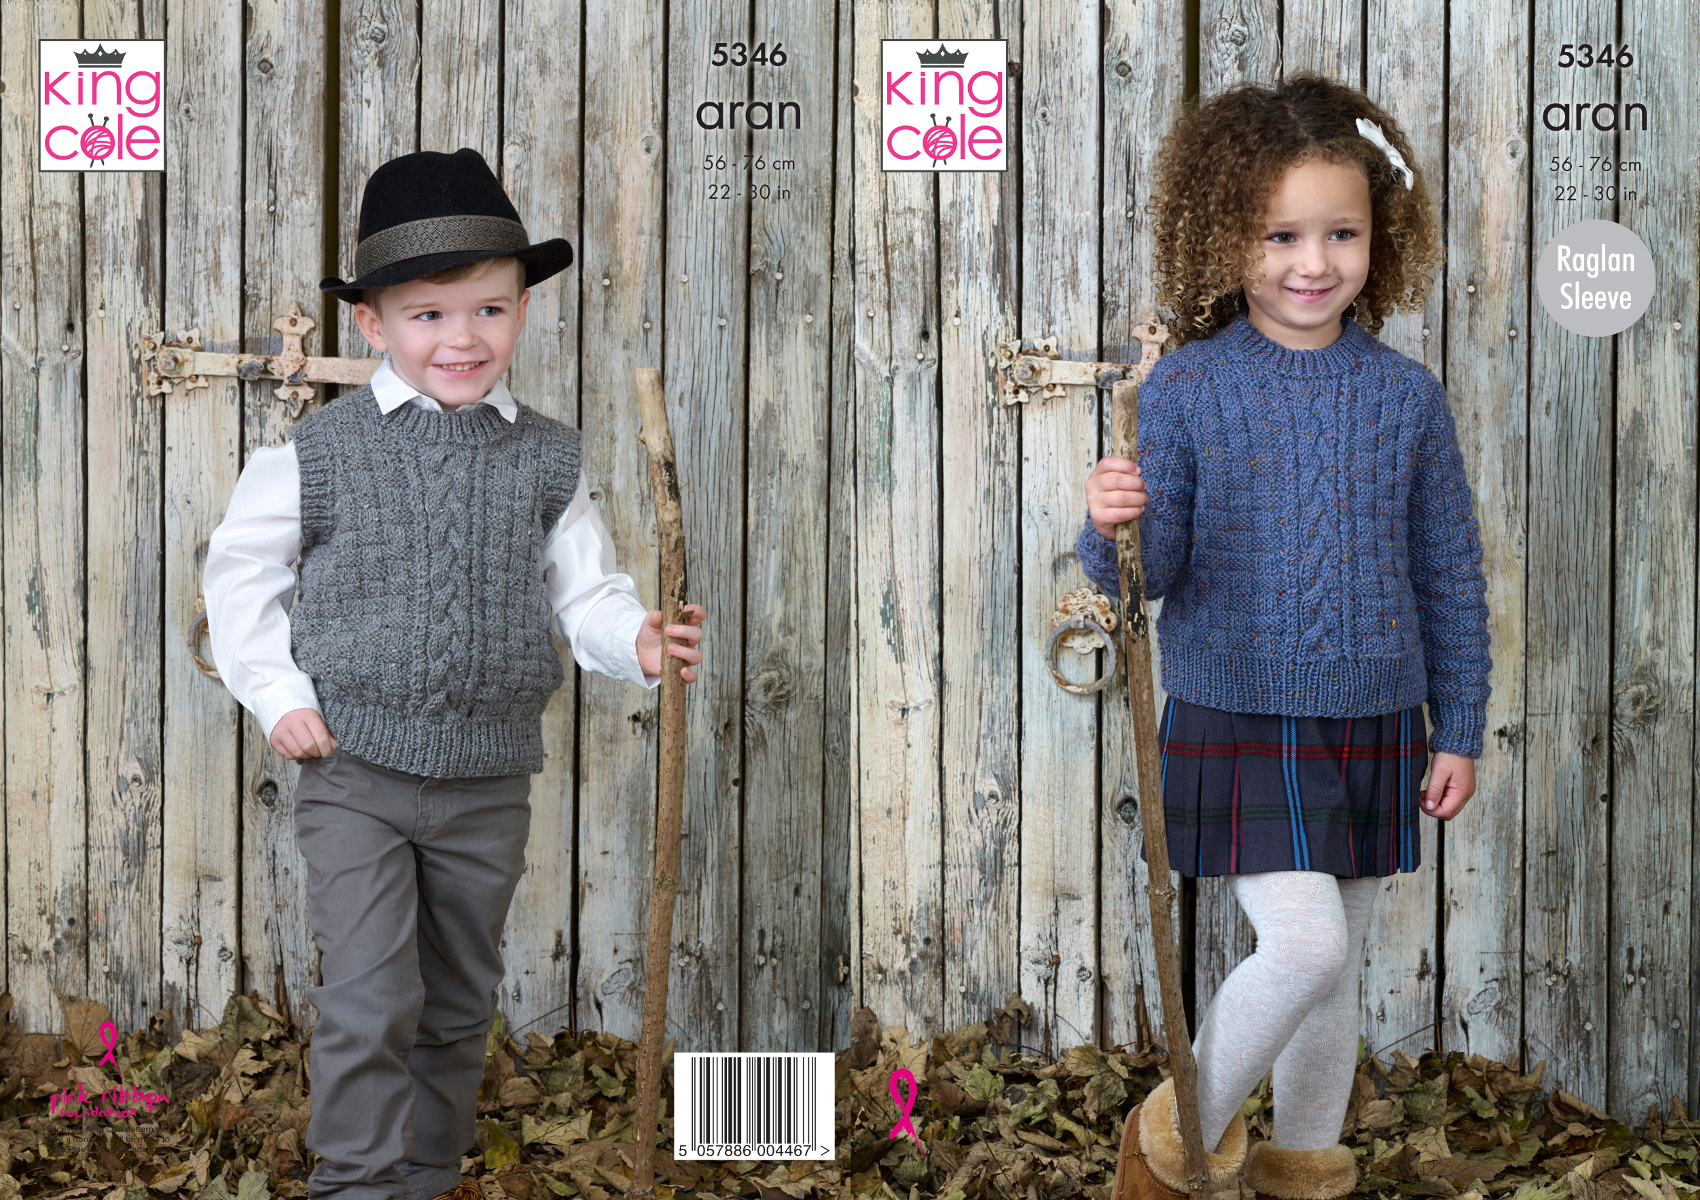 Childrens Aran Knitting Patterns Details About King Cole Childrens Aran Knitting Pattern Girls Boys Cable Sweater Slipover 5346